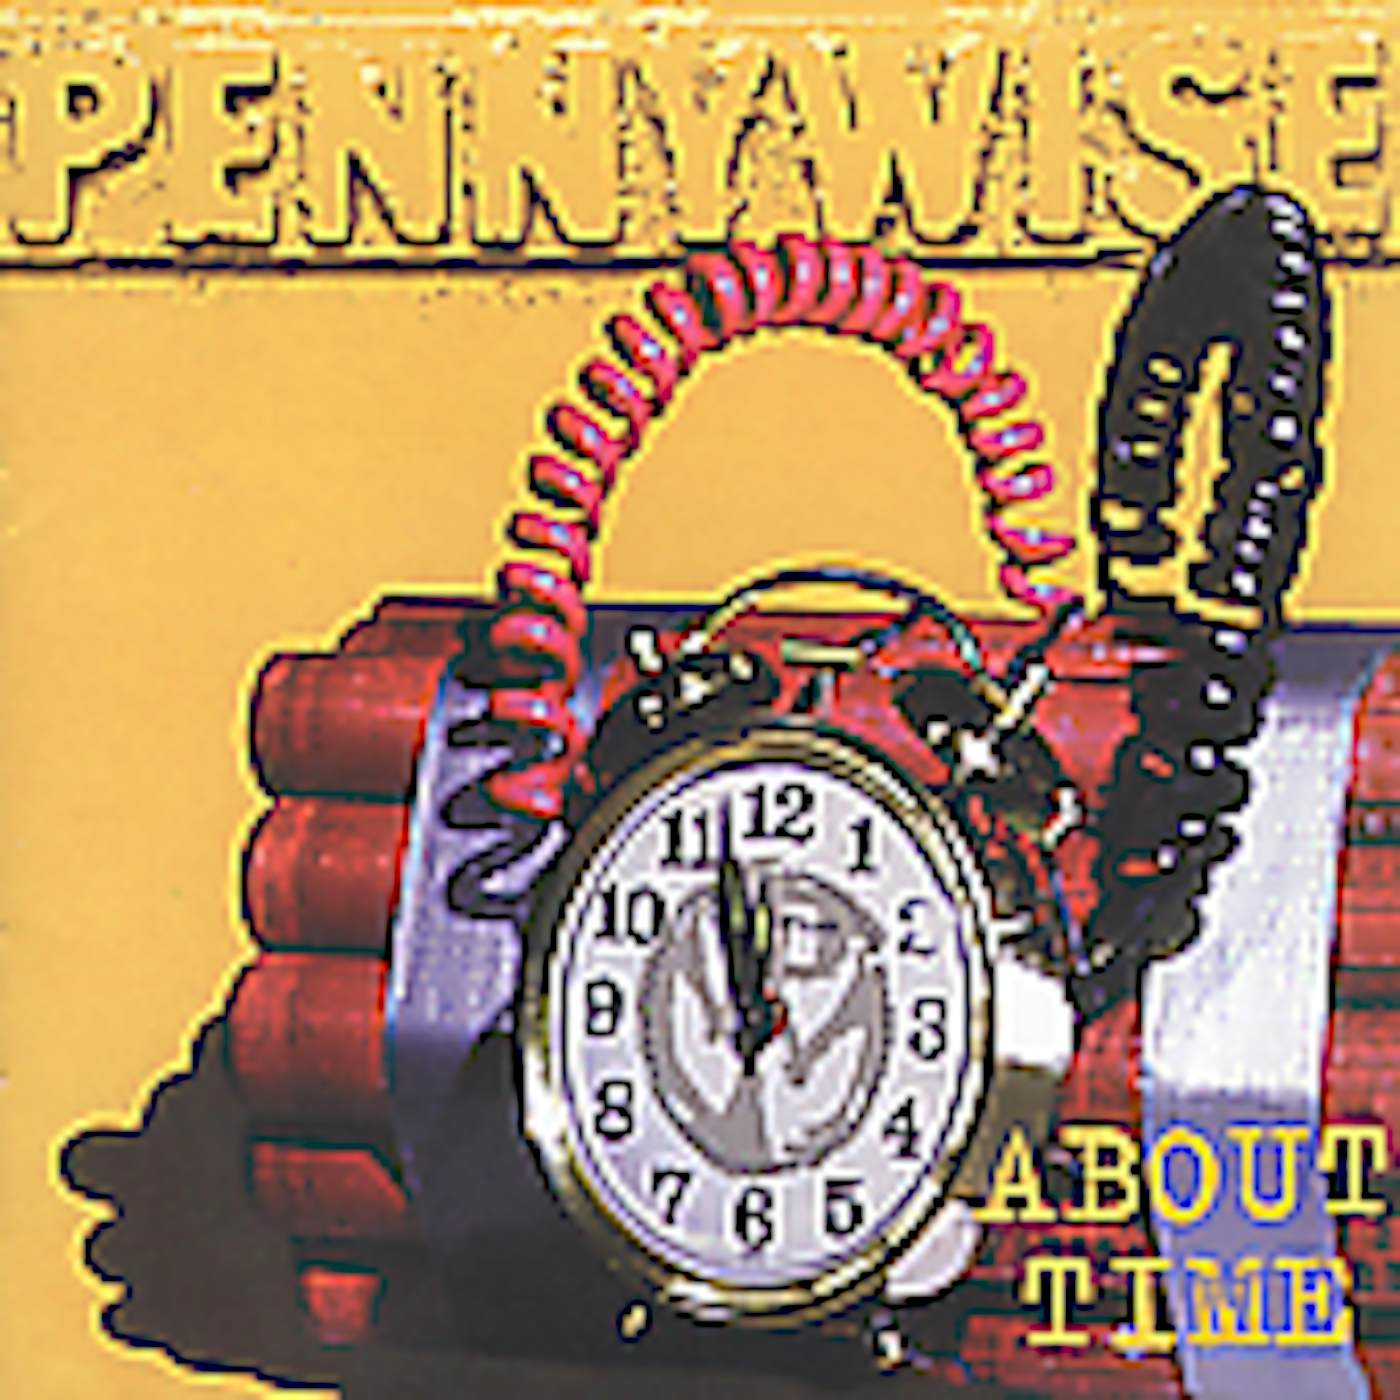 Pennywise ABOUT TIME CD